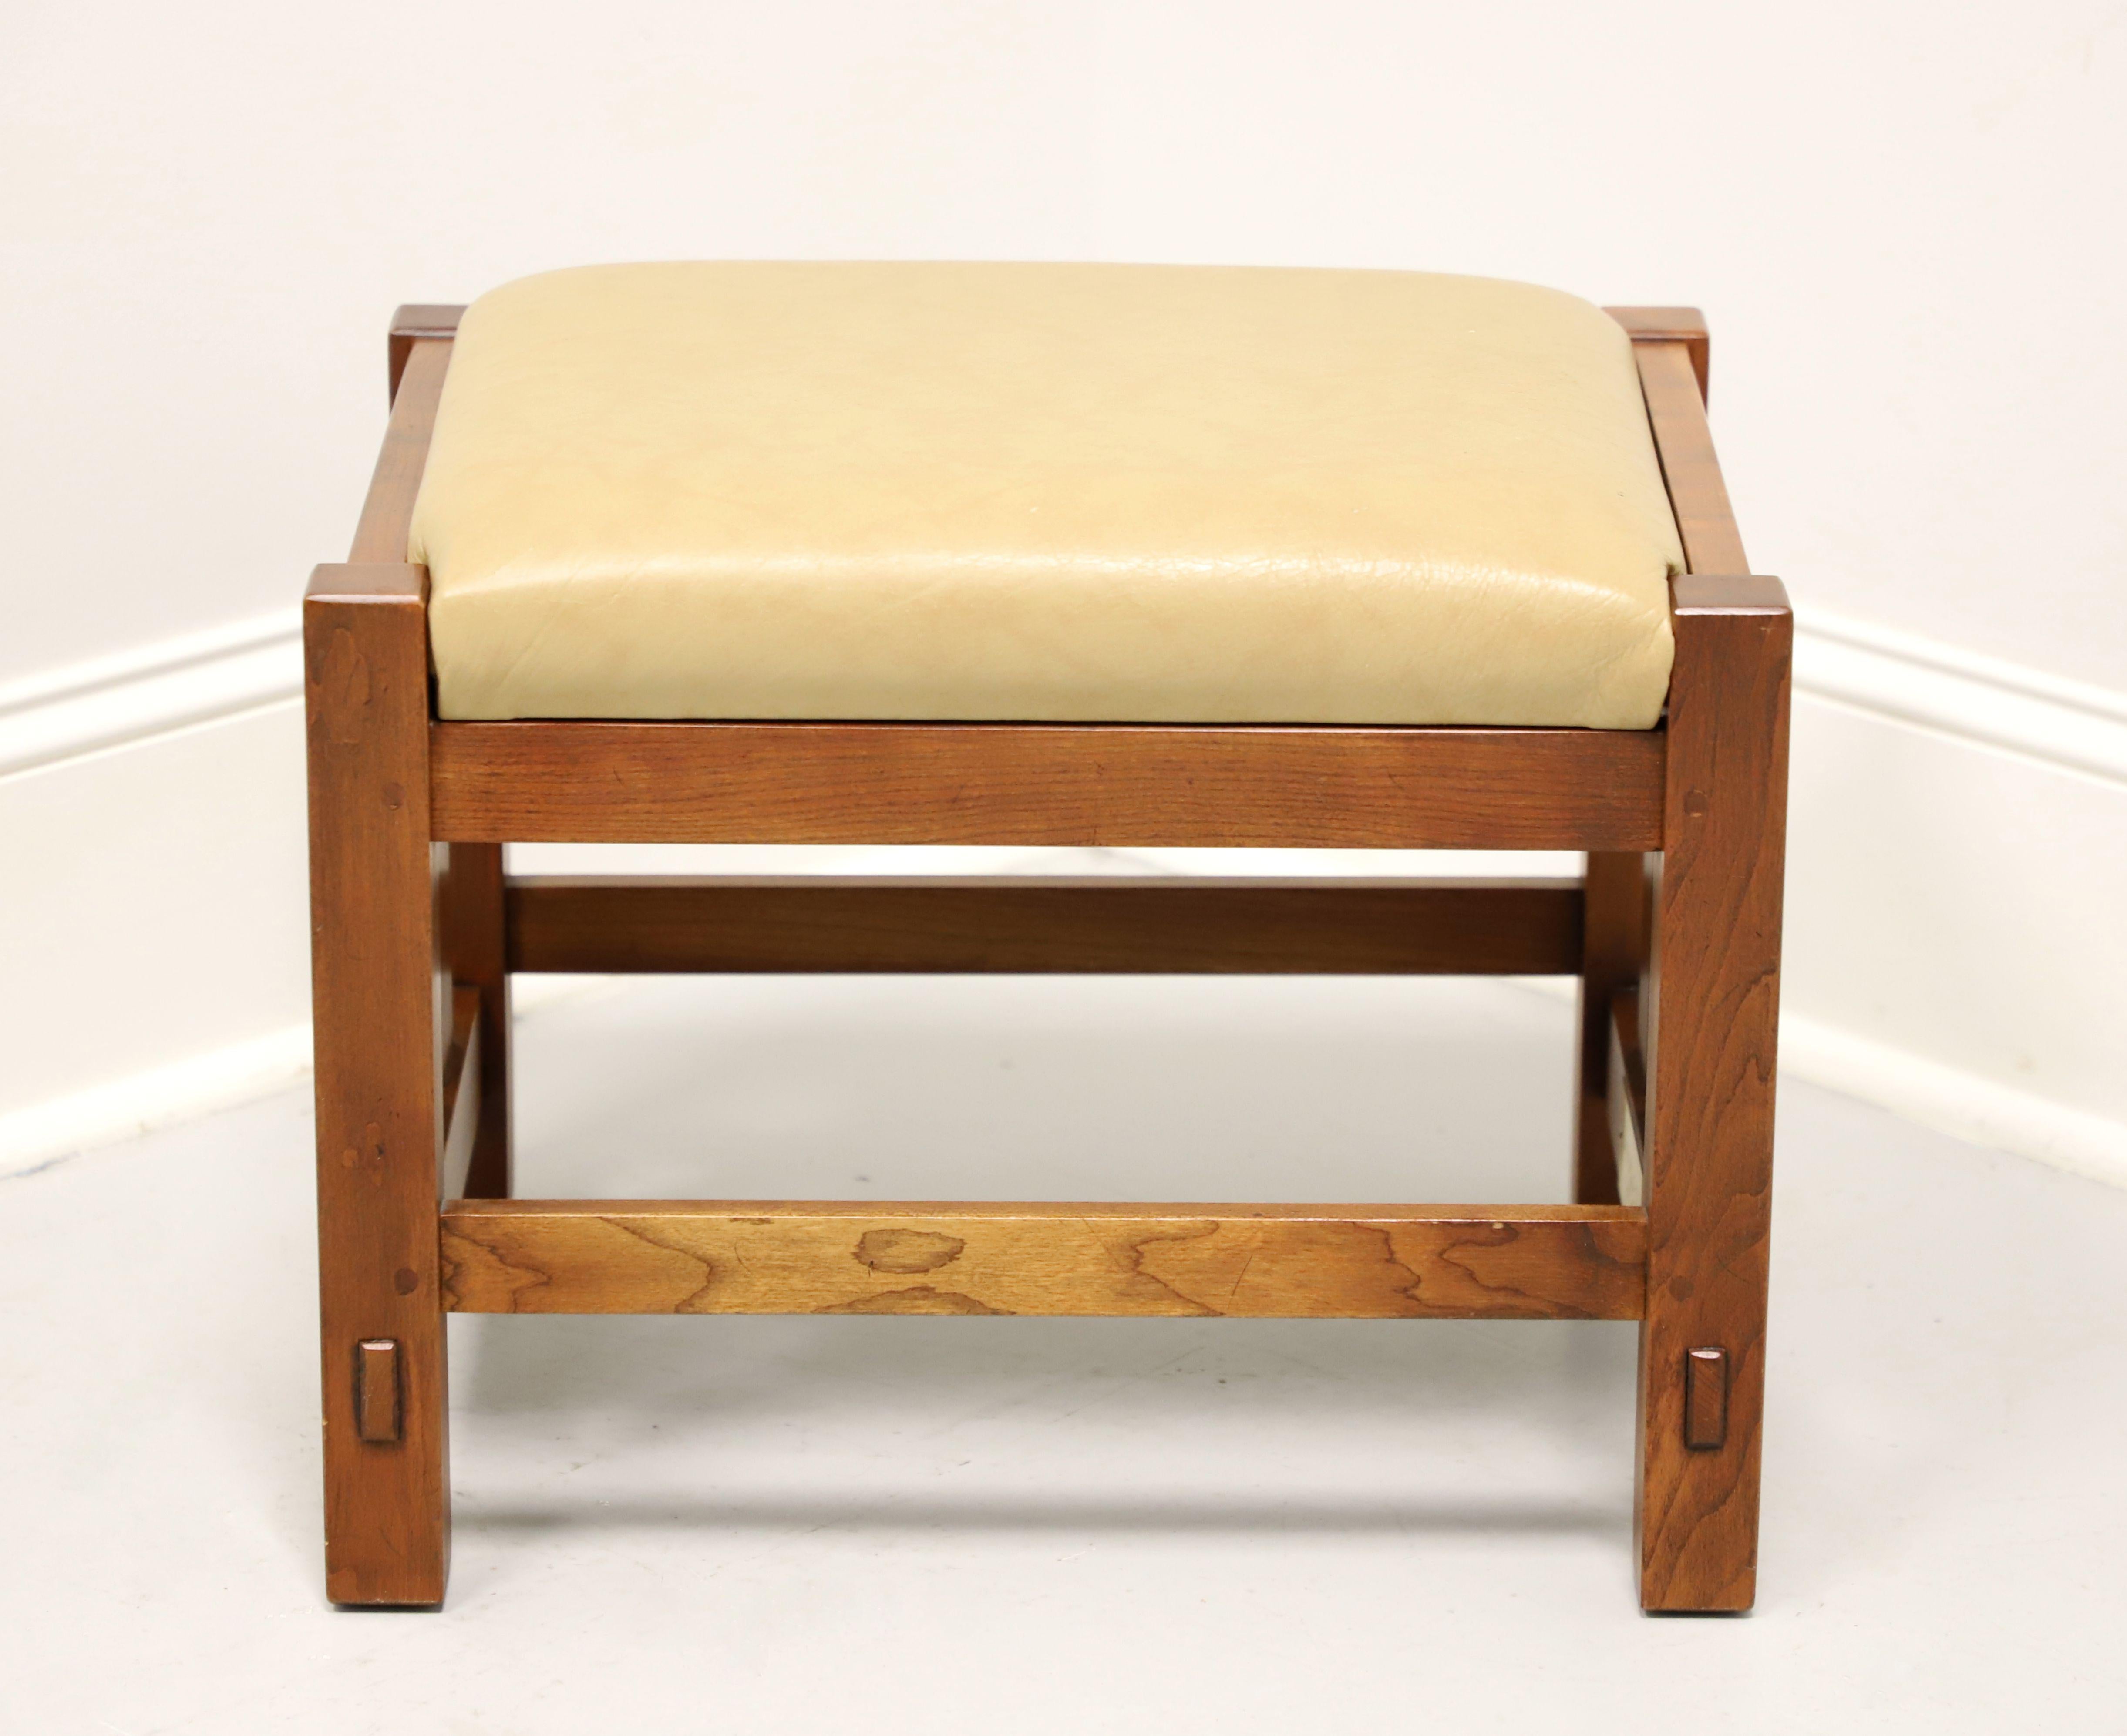 An Arts & Crafts Mission style footstool by Stickley Furniture. Solid cherry wood, tan color leather upholstered seat, slatted sides, stretchers, and square straight legs. Made in Manilas, New York, USA, circa 1996.

Style #: 